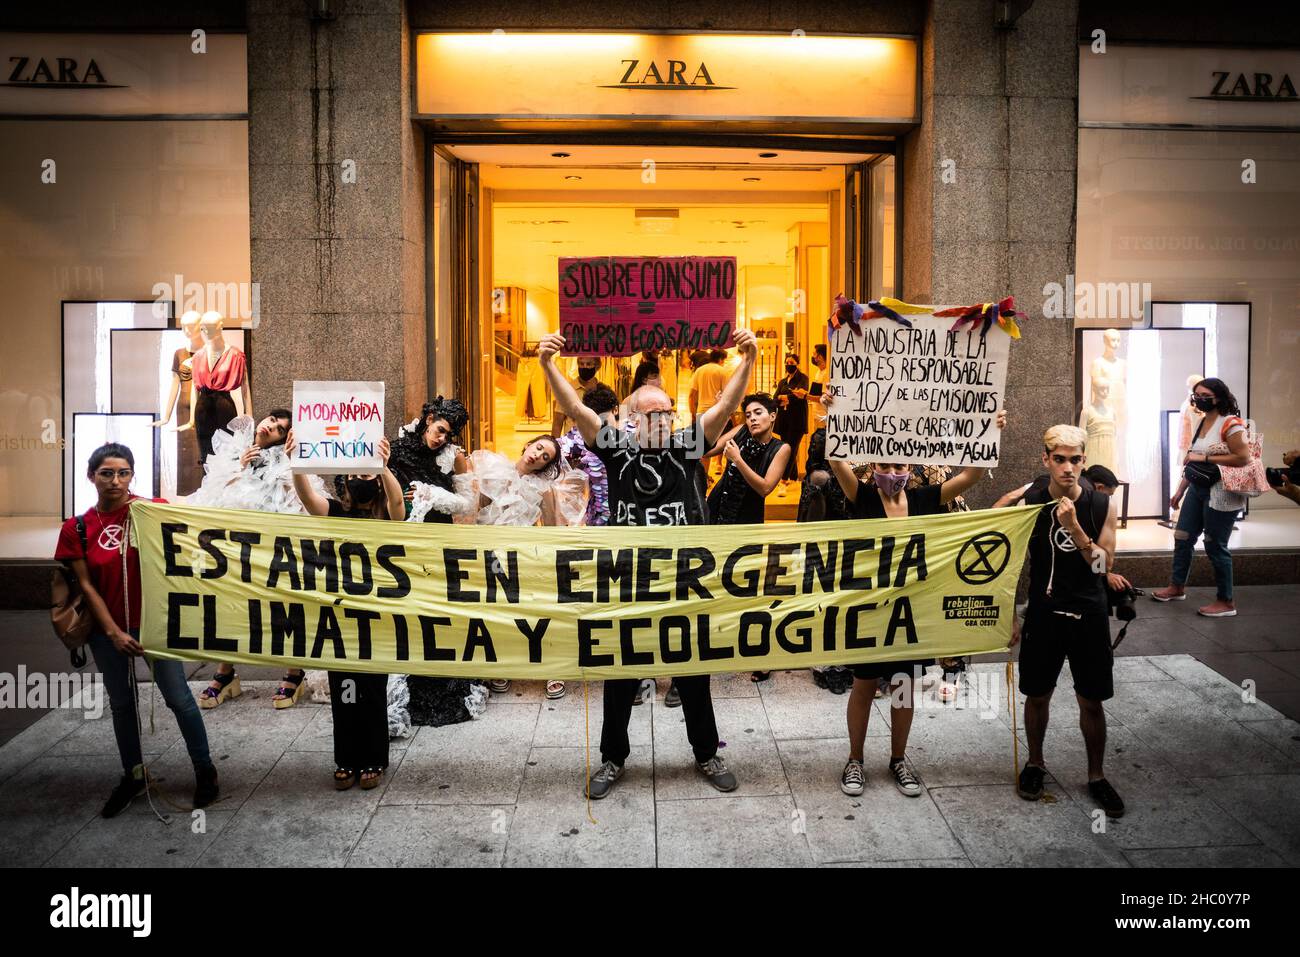 December 22, 2021, Ciudad AutÃ³noma de Buenos Aires, Buenos Aires,  Argentina: The international environmental organization Rebellion or  Extinction (XR) held a parade at the doors of the clothing store ''ZARA''  to make